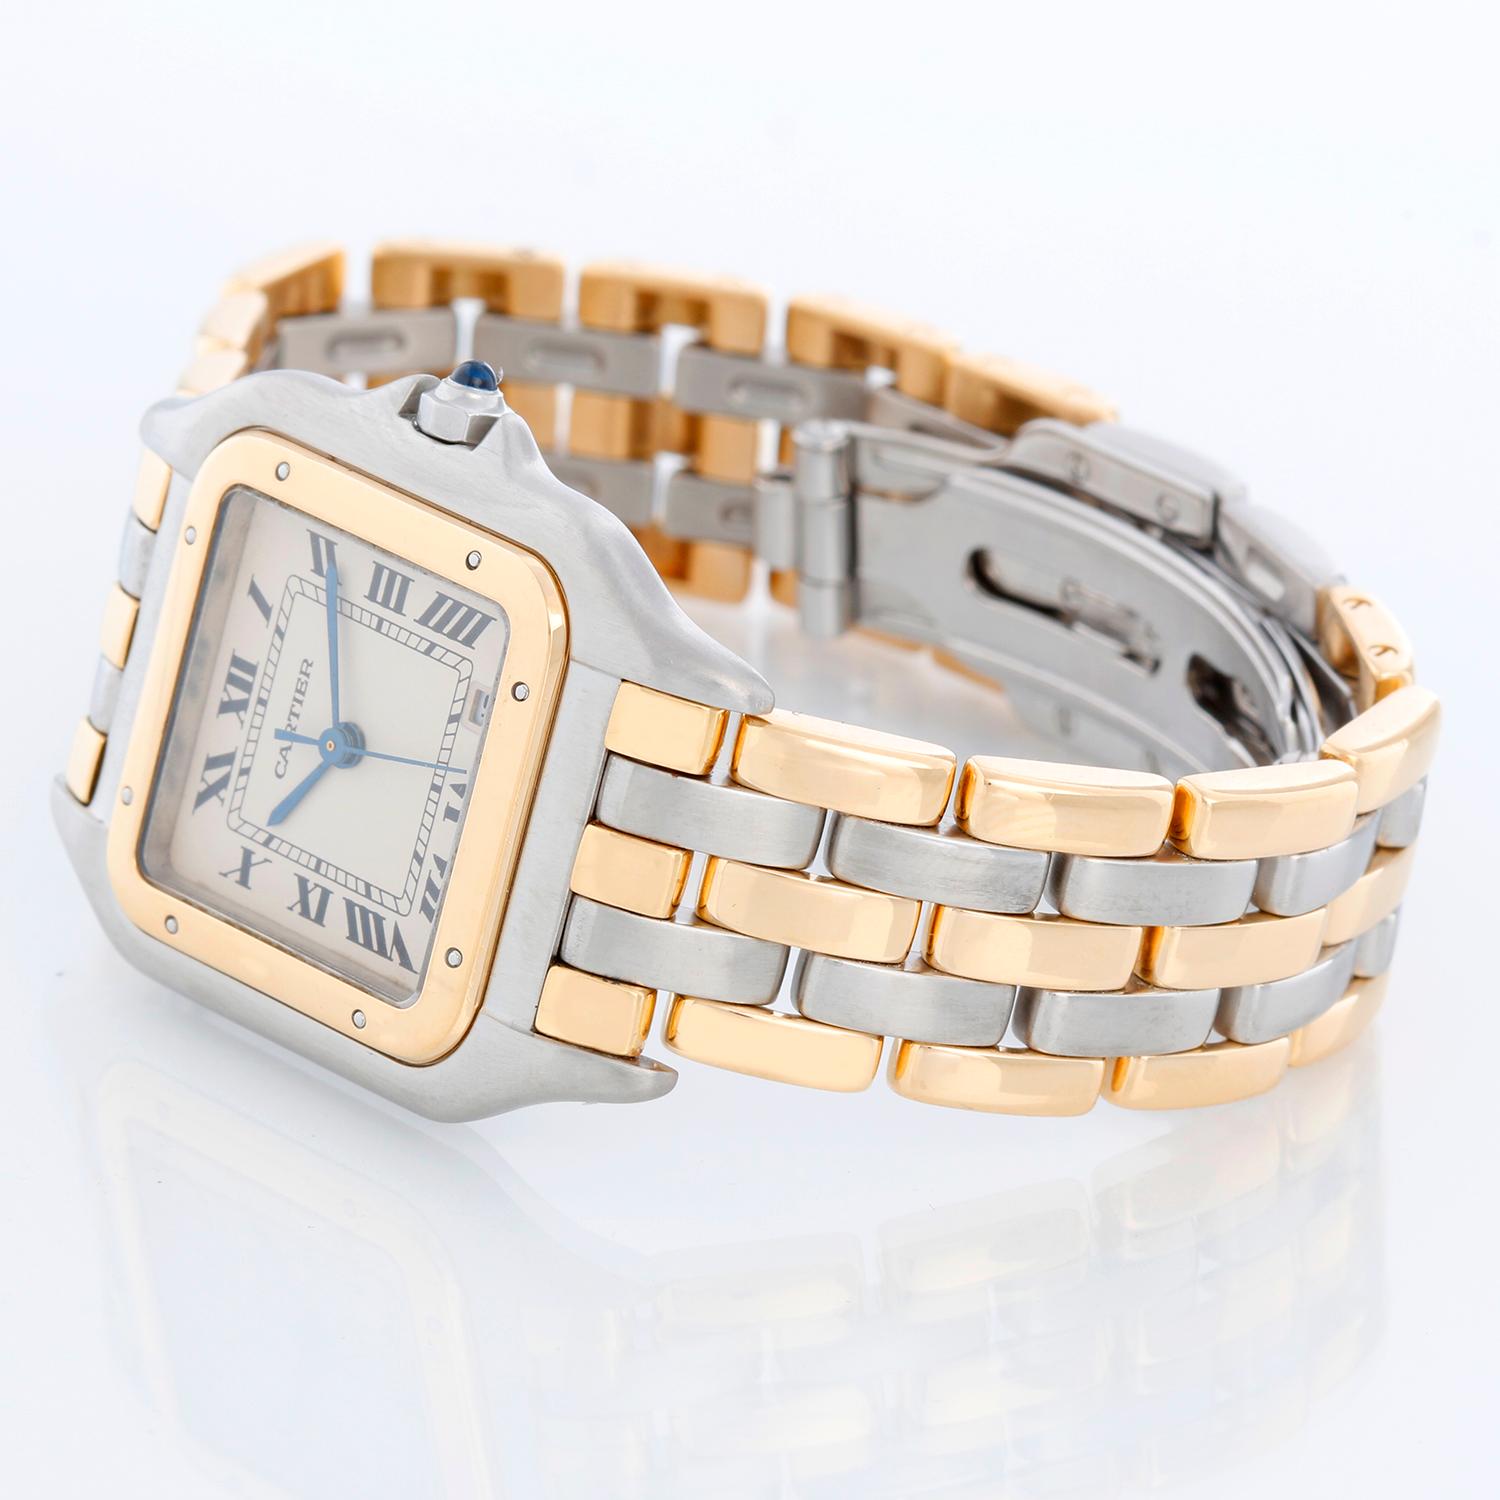 Cartier 3-Row Panther 2-Tone Steel & Gold Watch - Quartz. Stainless steel case with 18k yellow gold bezel (27mm x 37mm). Ivory colored dial with black Roman numerals and date at 5 o'clock. Stainless steel and 18k yellow 3-row Cartier Panther